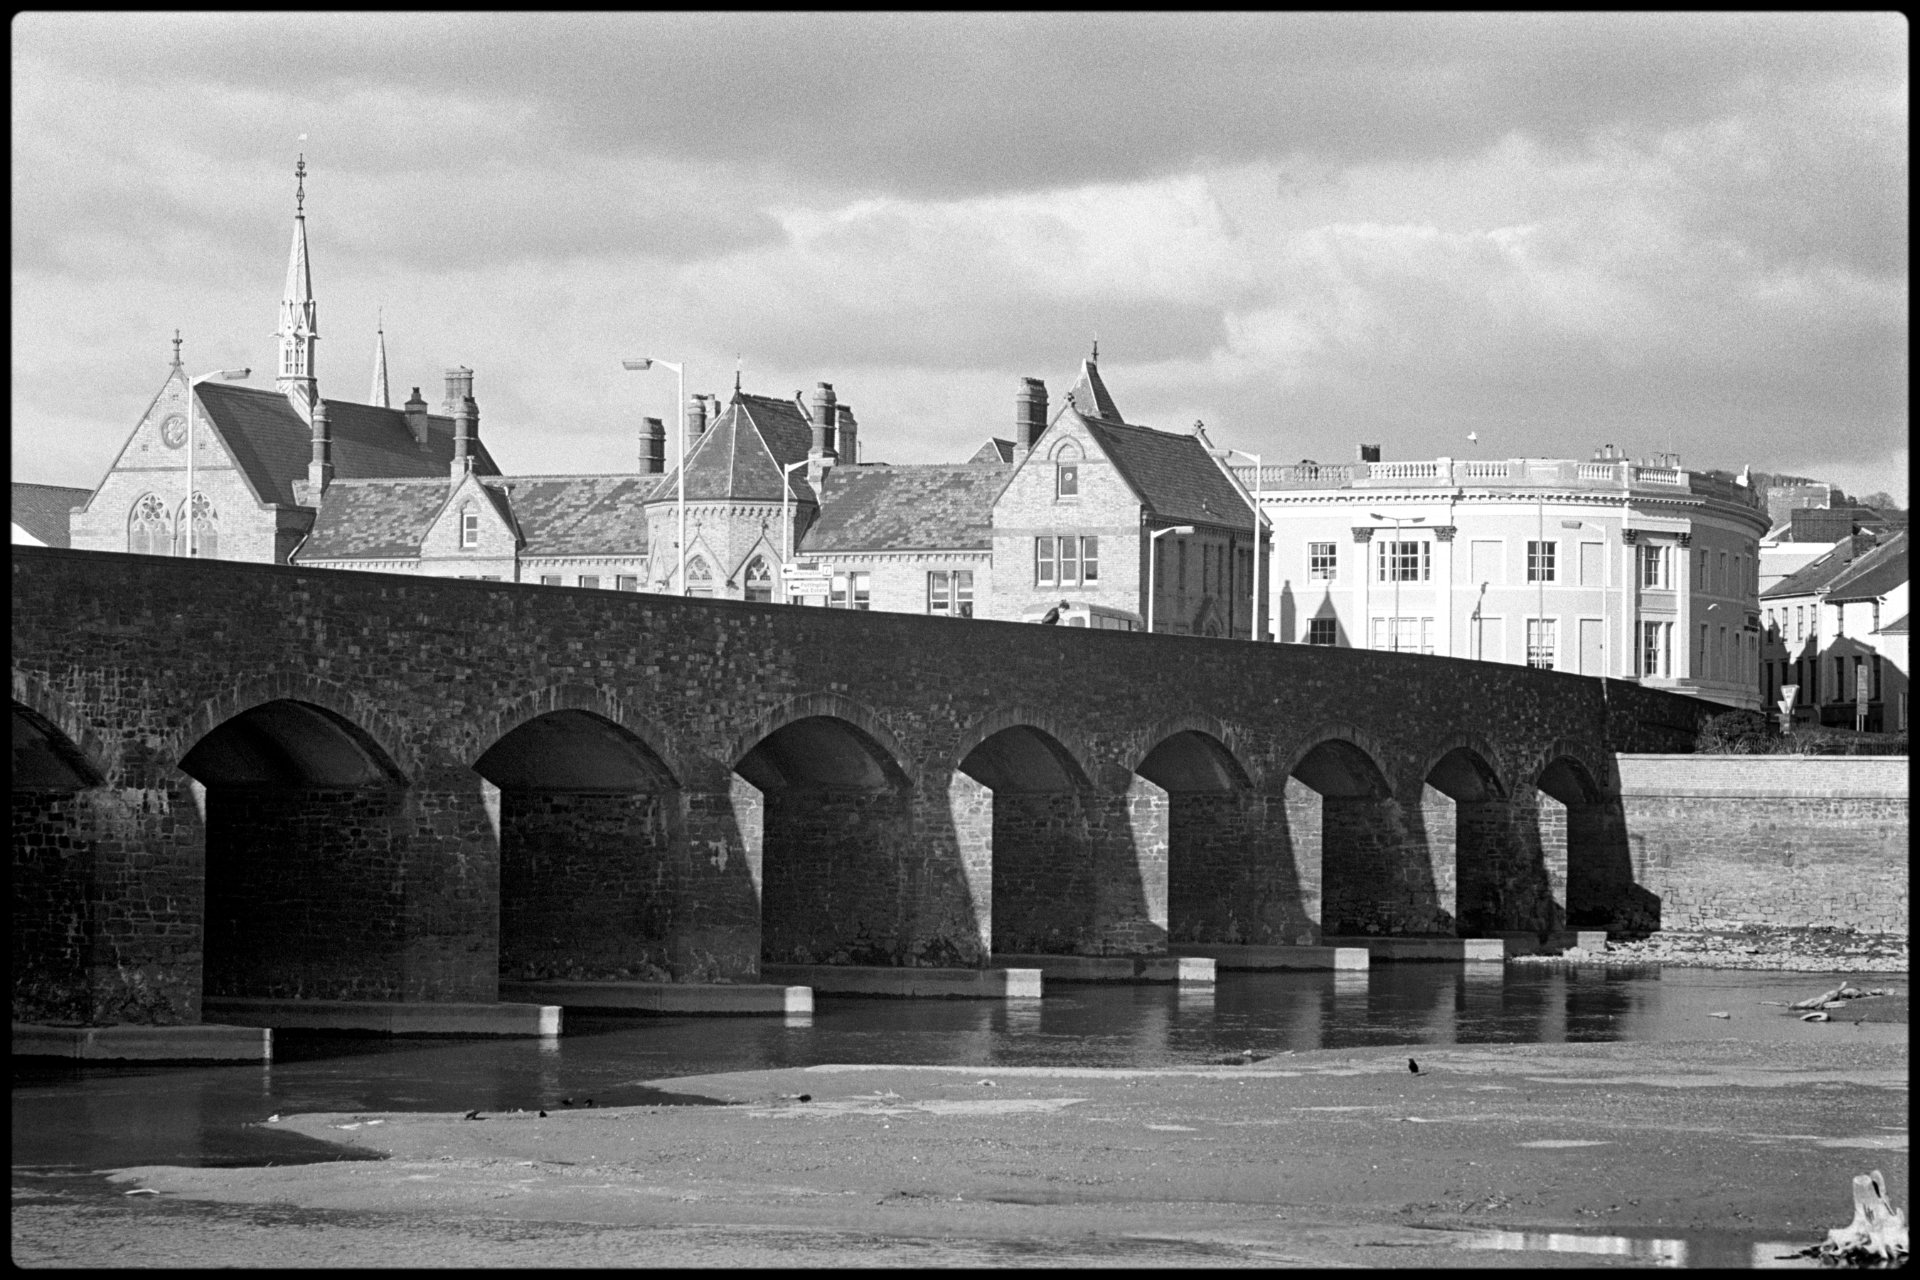 View of old bridge across to Victorian buildings. <br />
[Barnstaple Bridge across the river Taw at Barnstaple. Victorian buildings can be seen on the opposite side of the river.]